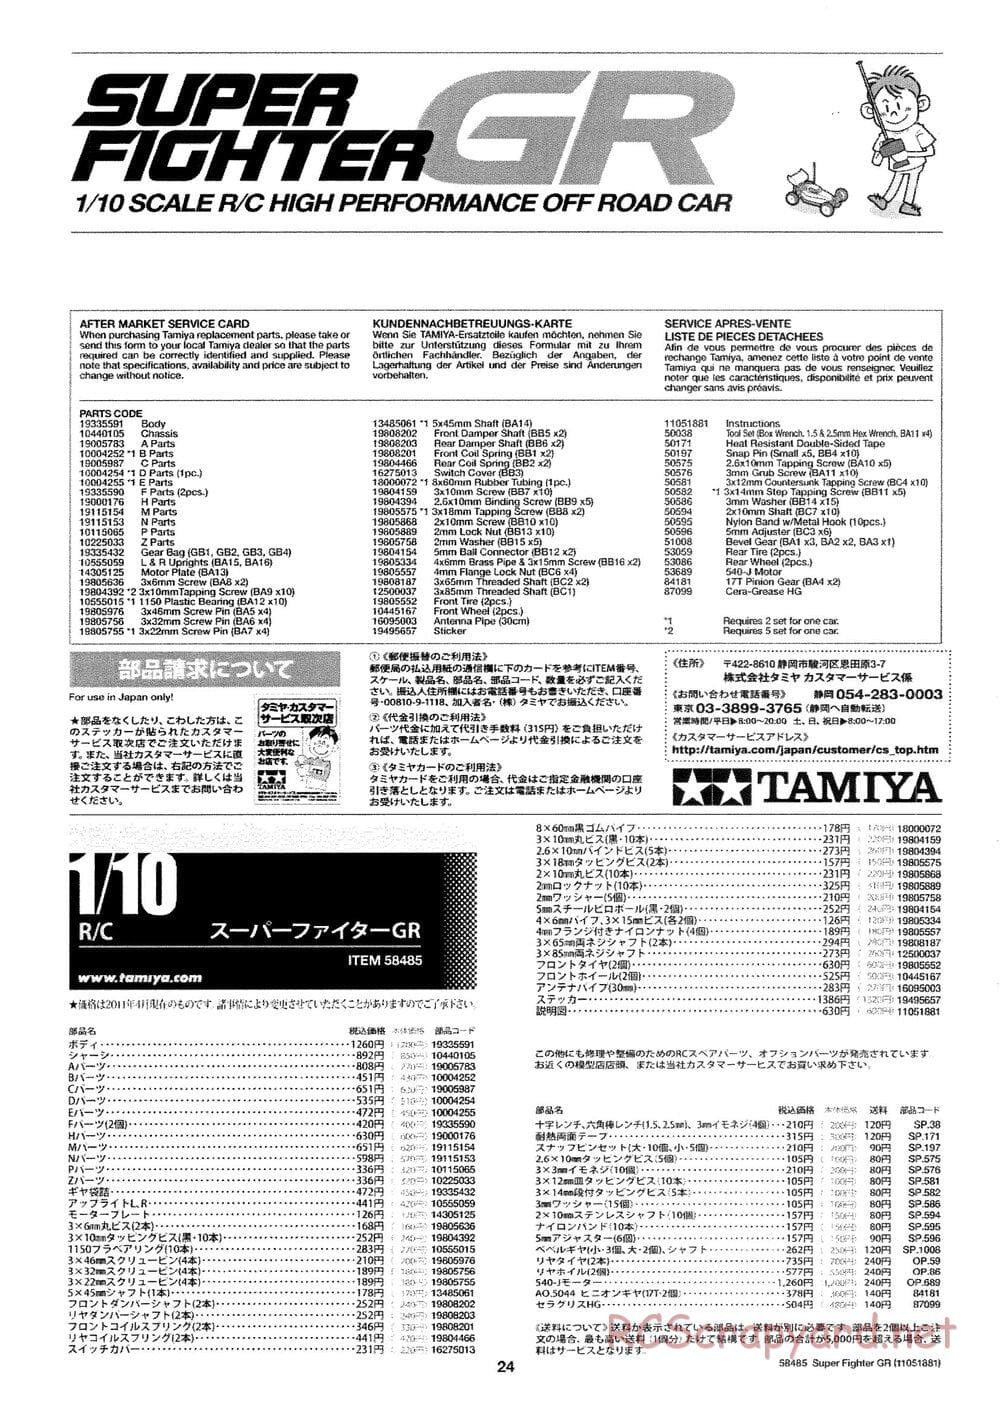 Tamiya - Super Fighter GR - DT-02 Chassis - Manual - Page 24